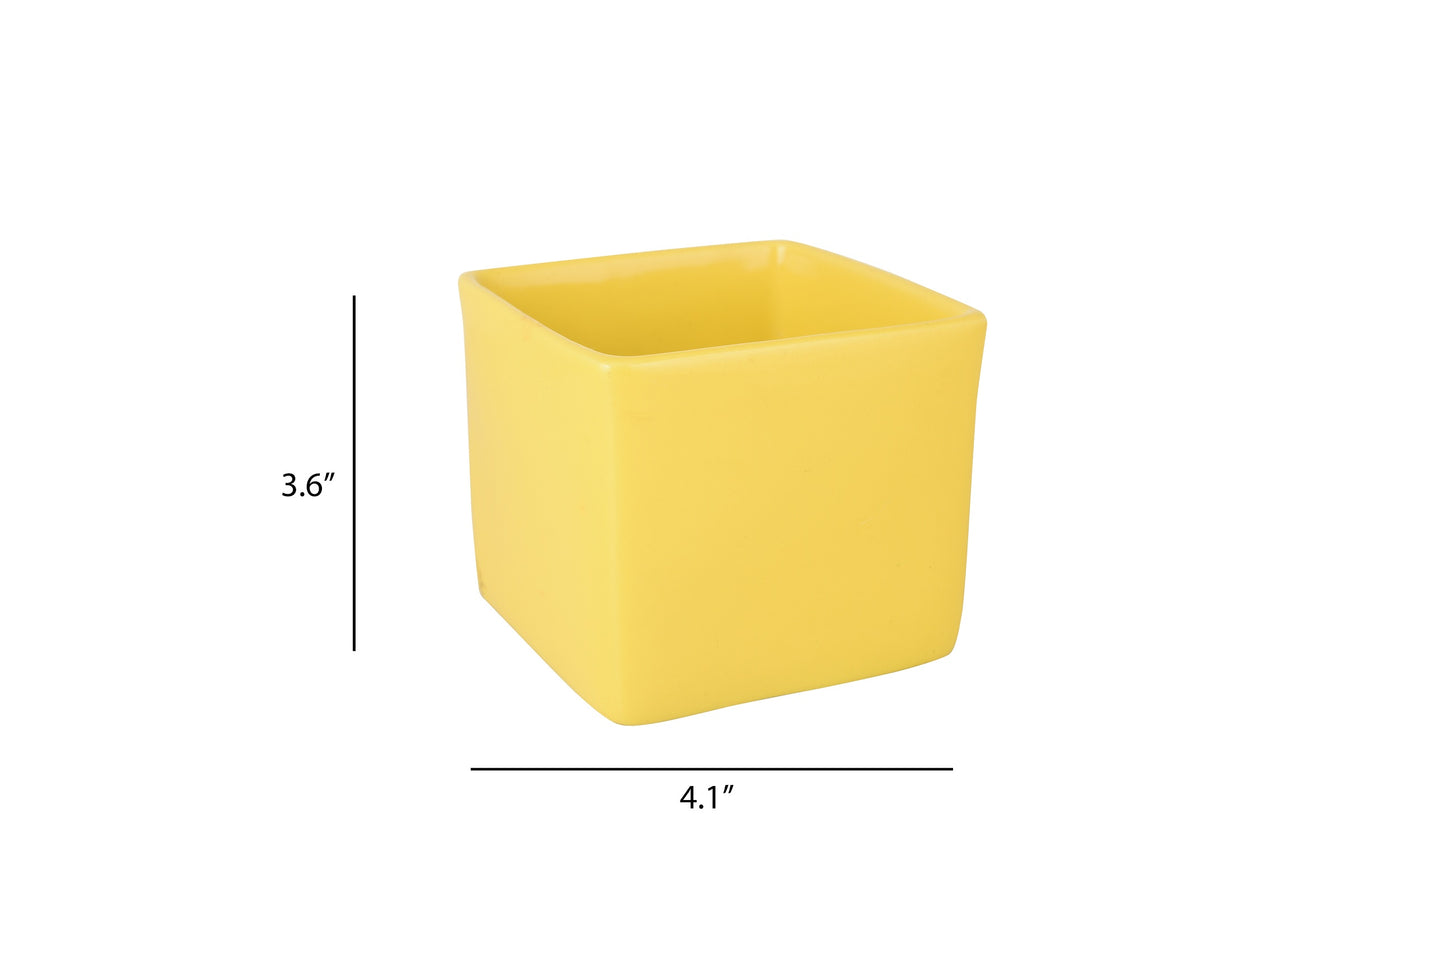 Exotic Green Solid Yellow Colour Square Shape Ceramic Studio Pottery/ Planter/Pot for Indoor Plants